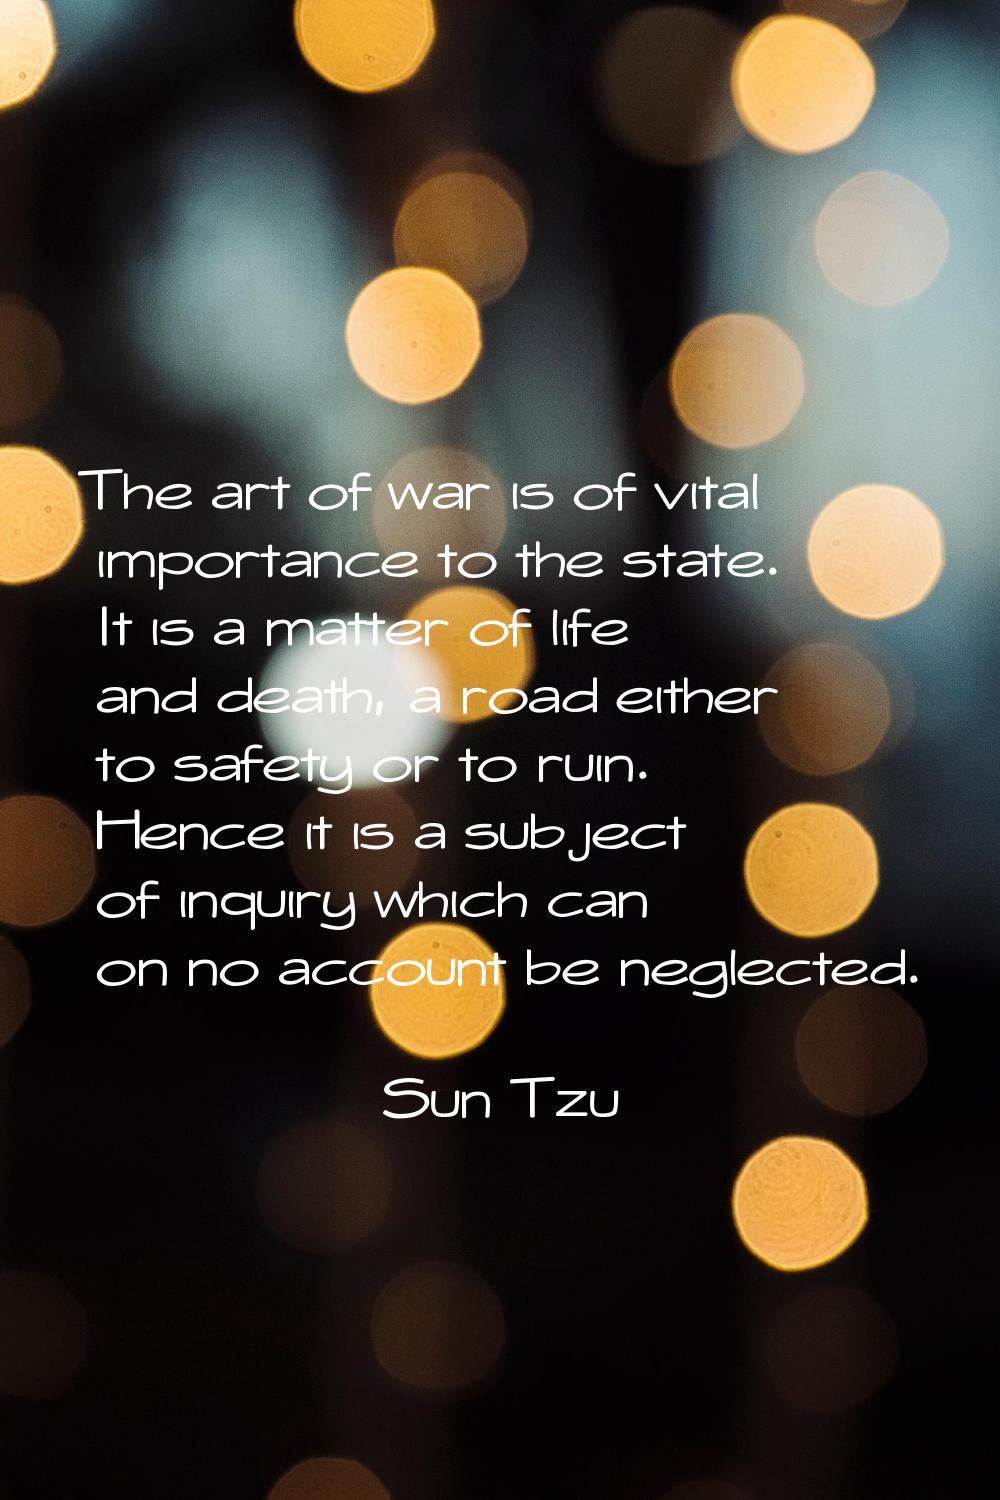 The art of war is of vital importance to the state. It is a matter of life and death, a road either